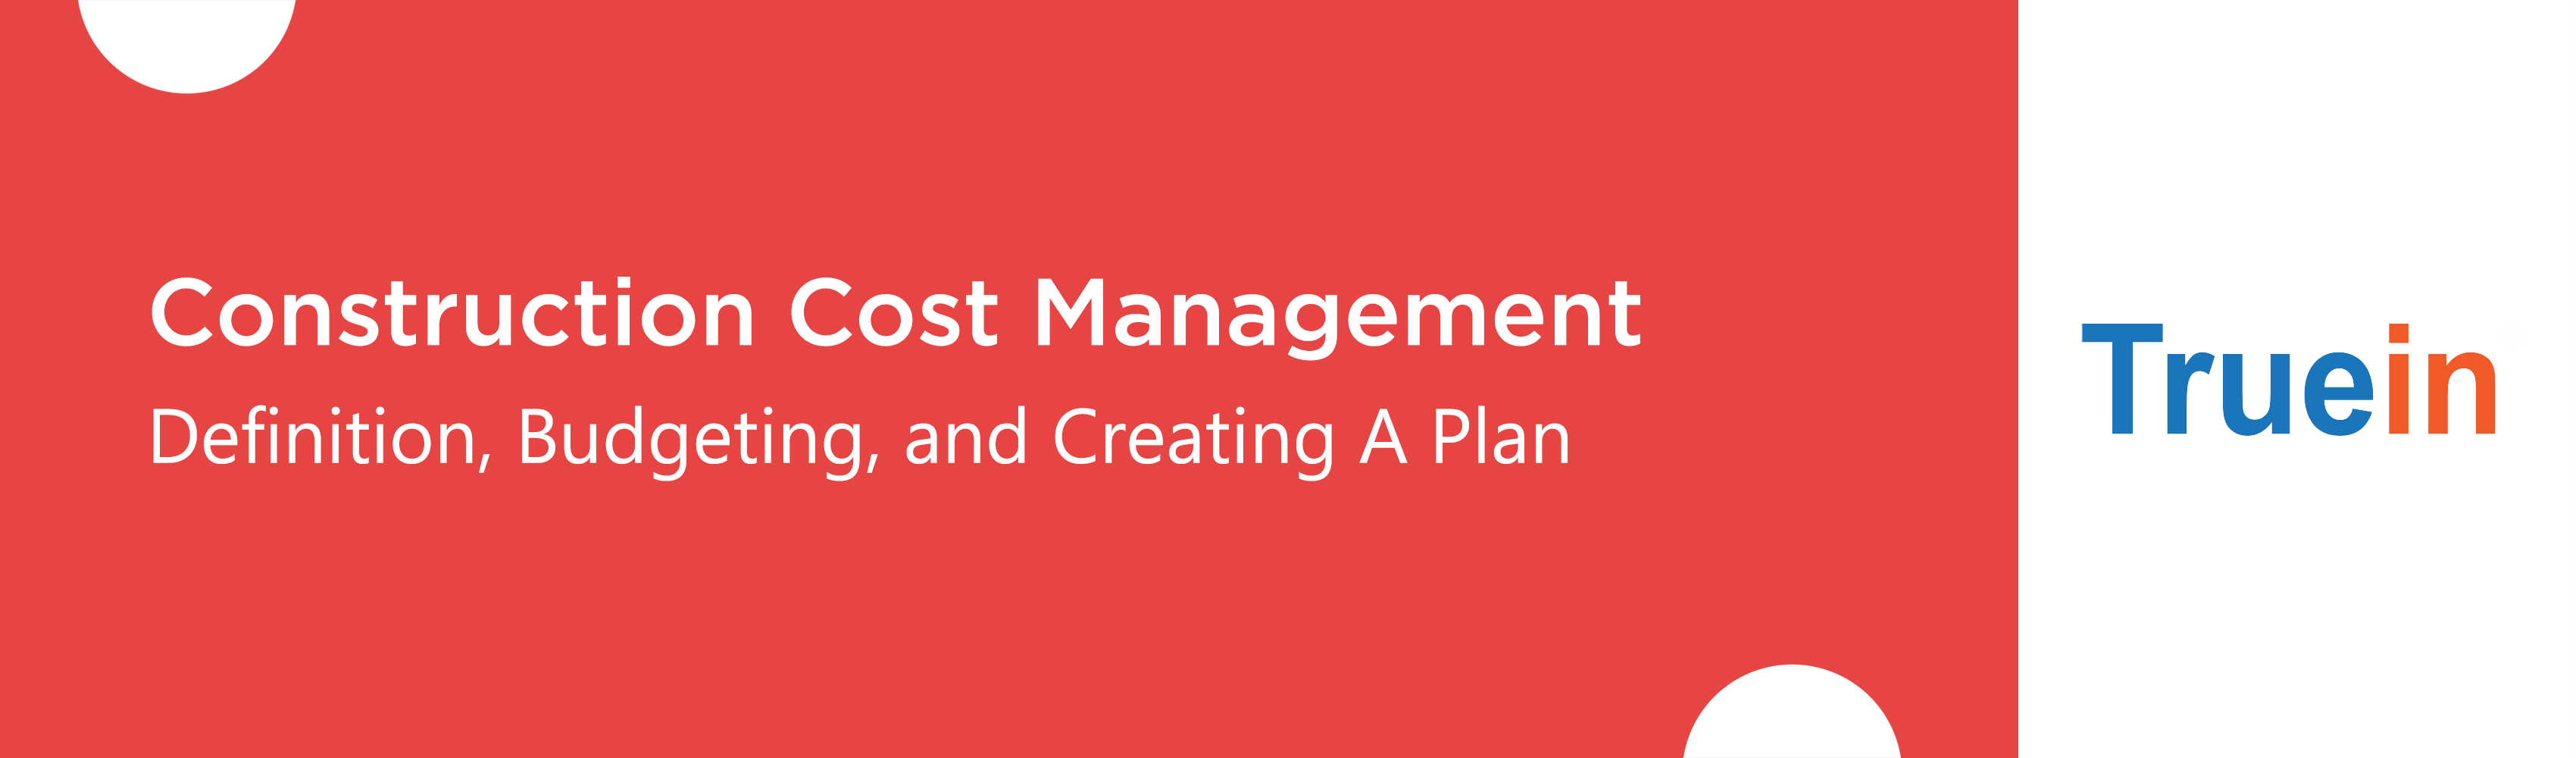 Construction Cost Management - Definition, Budgeting, and Creating A Plan